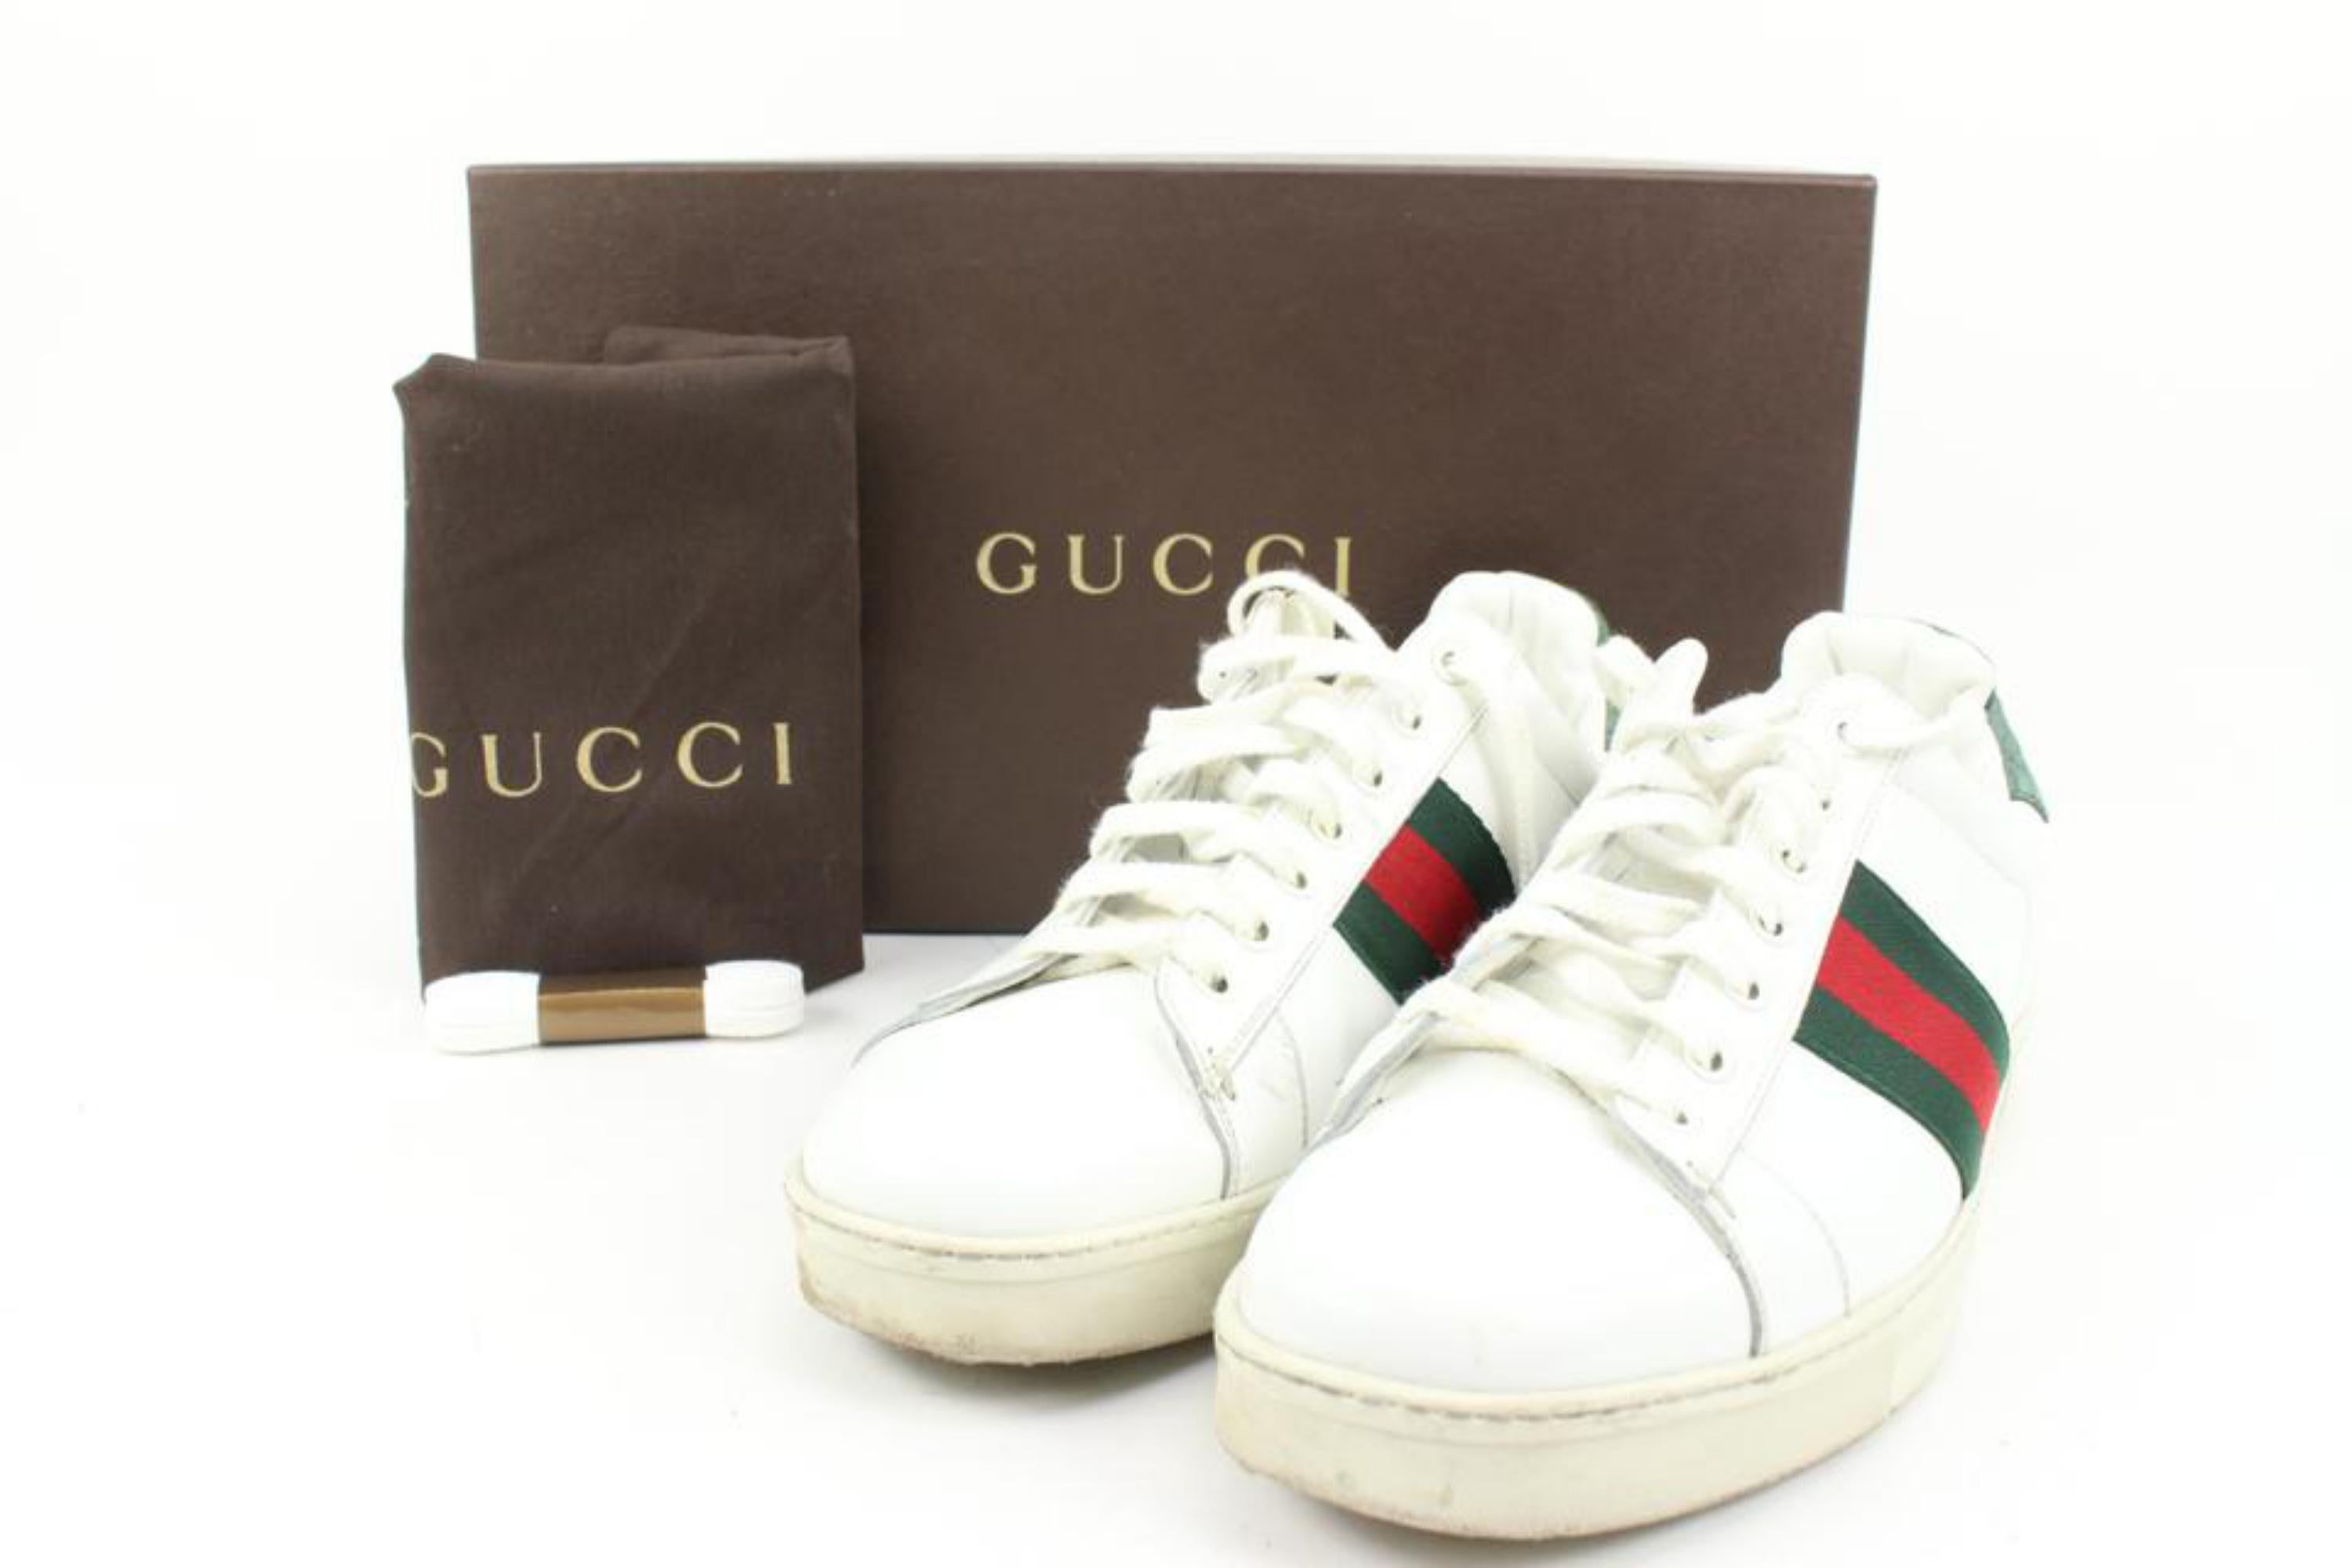 Gucci Men's 9.5 US White Web Ace Sneaker 87g24s
Date Code/Serial Number: 125375 
Made In: Italy
Measurements: Length:   11.75